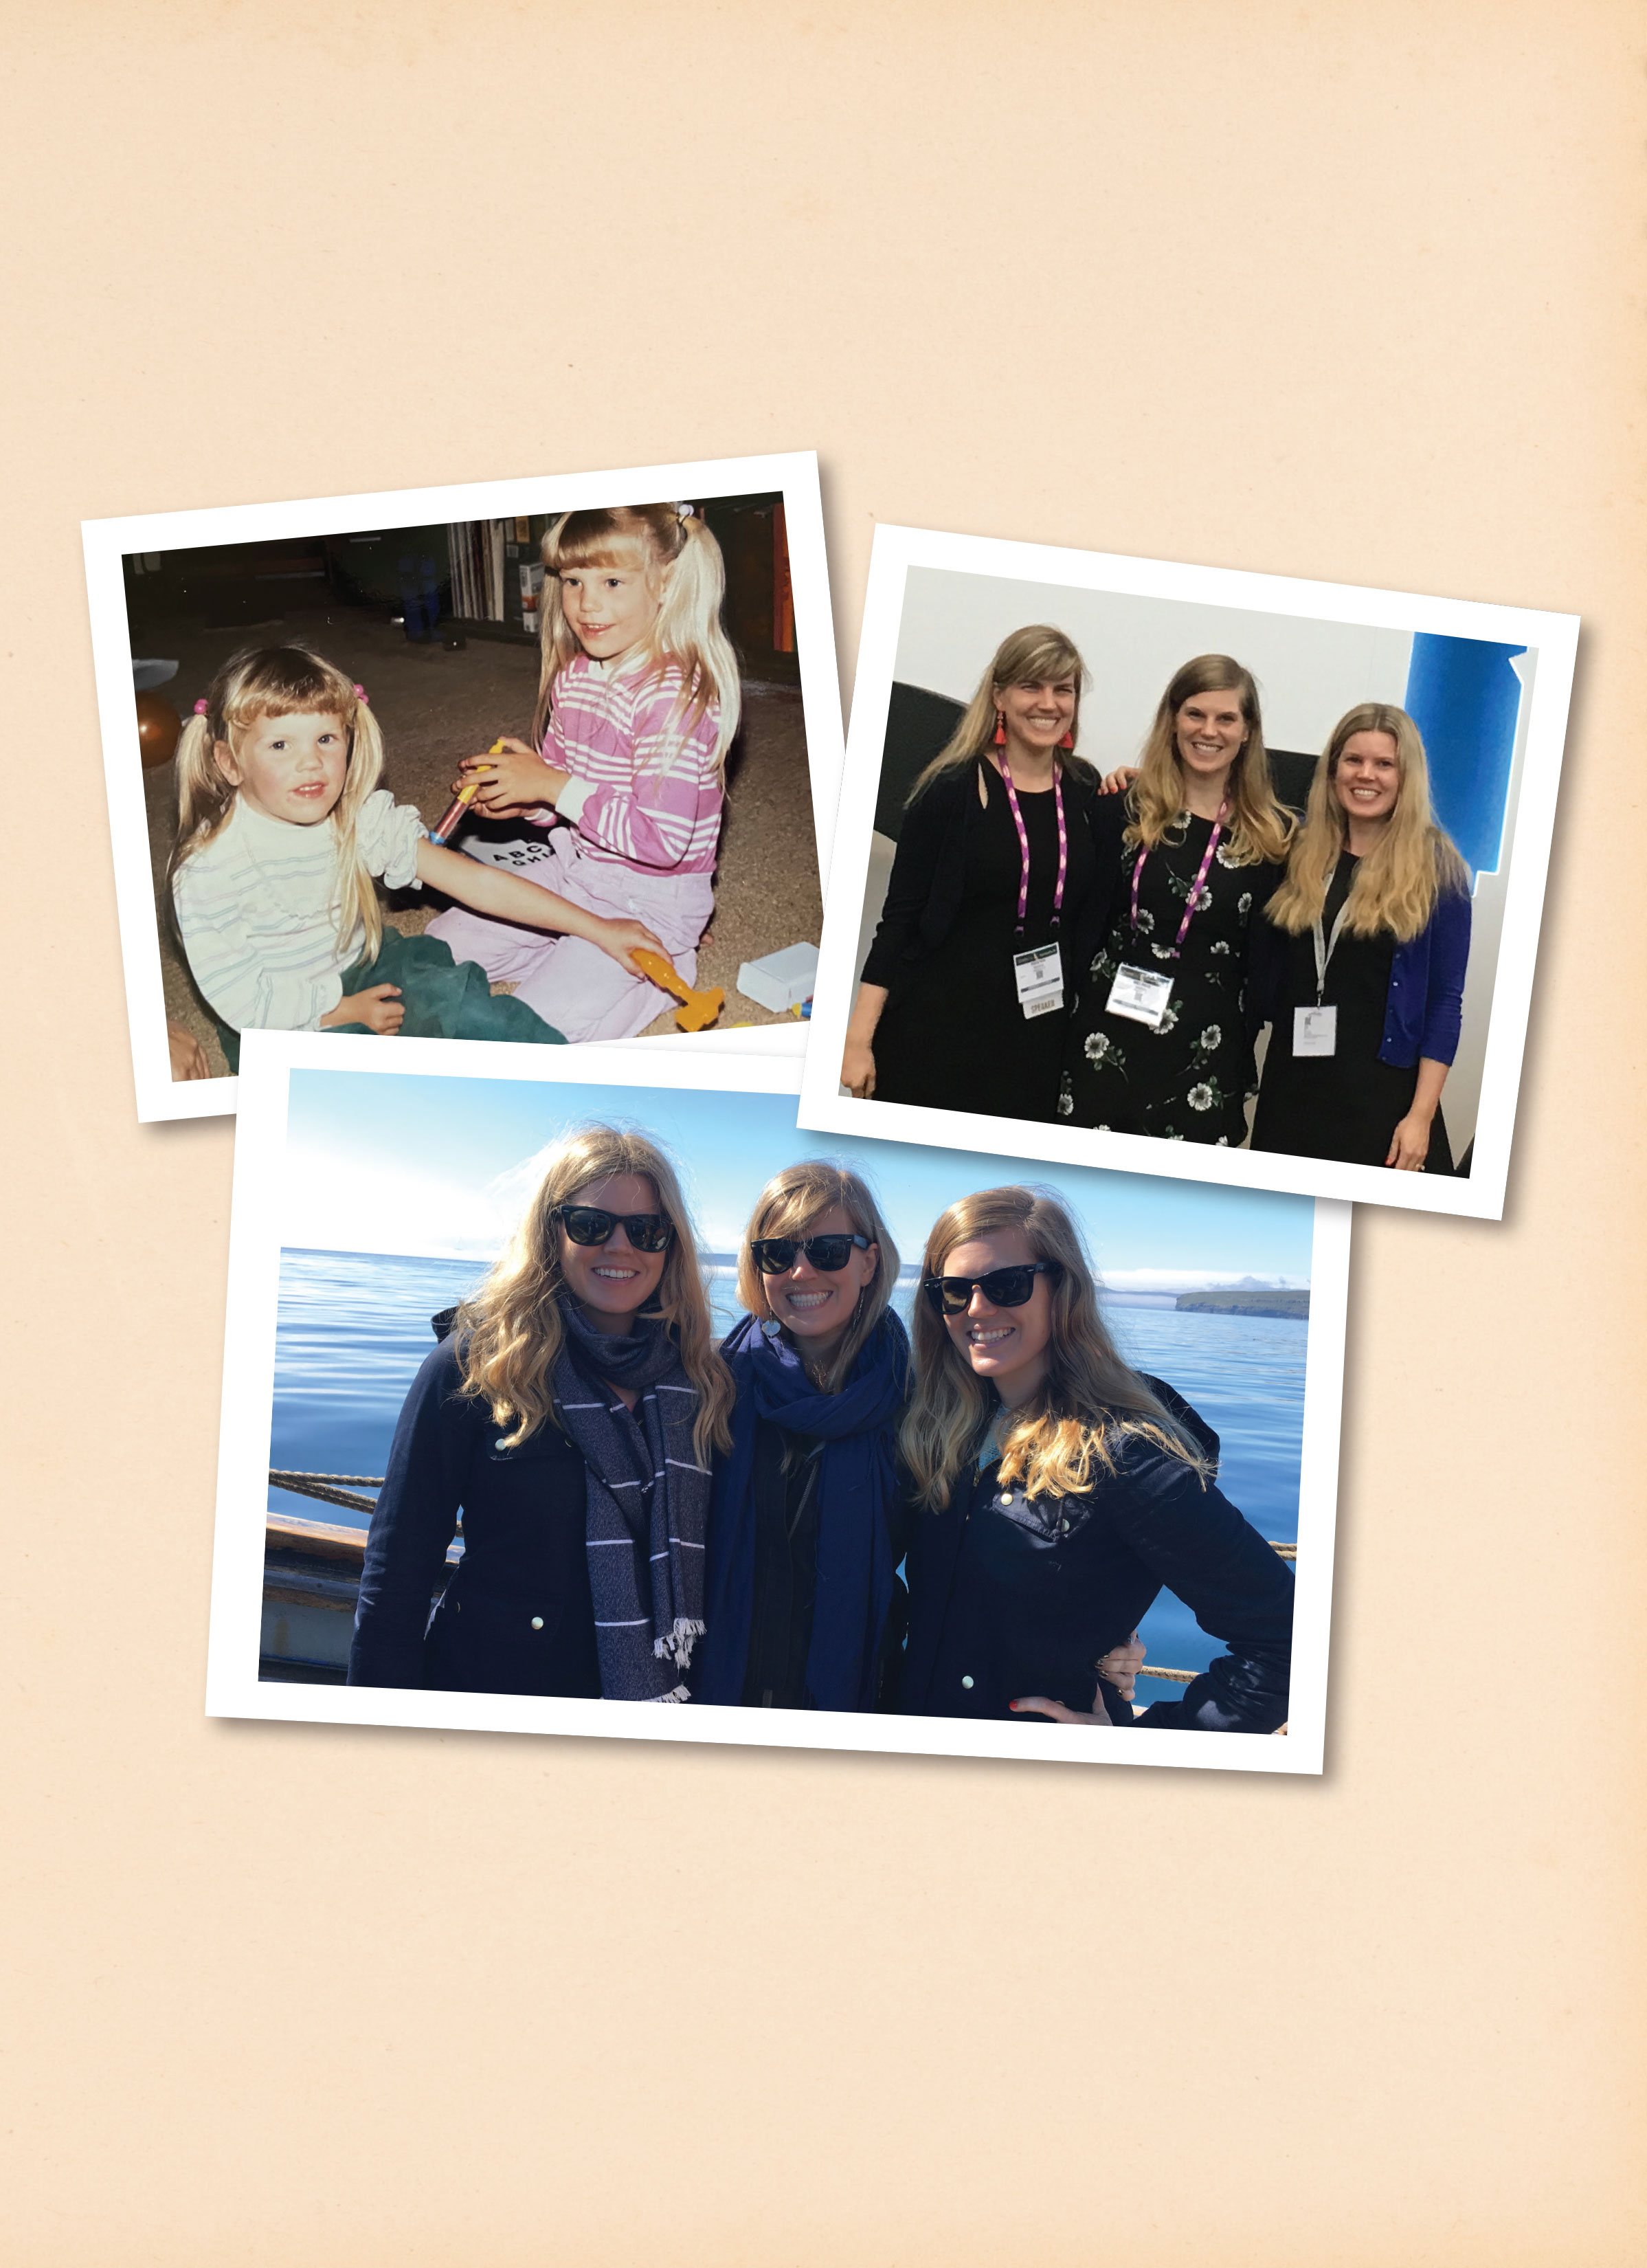 PHOTO CAPTIONS: Bottom left: A young Mindy gives younger sister Amy an injection with their toy medical kit. Right photo, left to right, Kristen, Mindy and Amy during Digestive Disease Week in Washington, D.C. Bottom, left to right, Amy, Kristen and Mindy in the Faroe Islands.